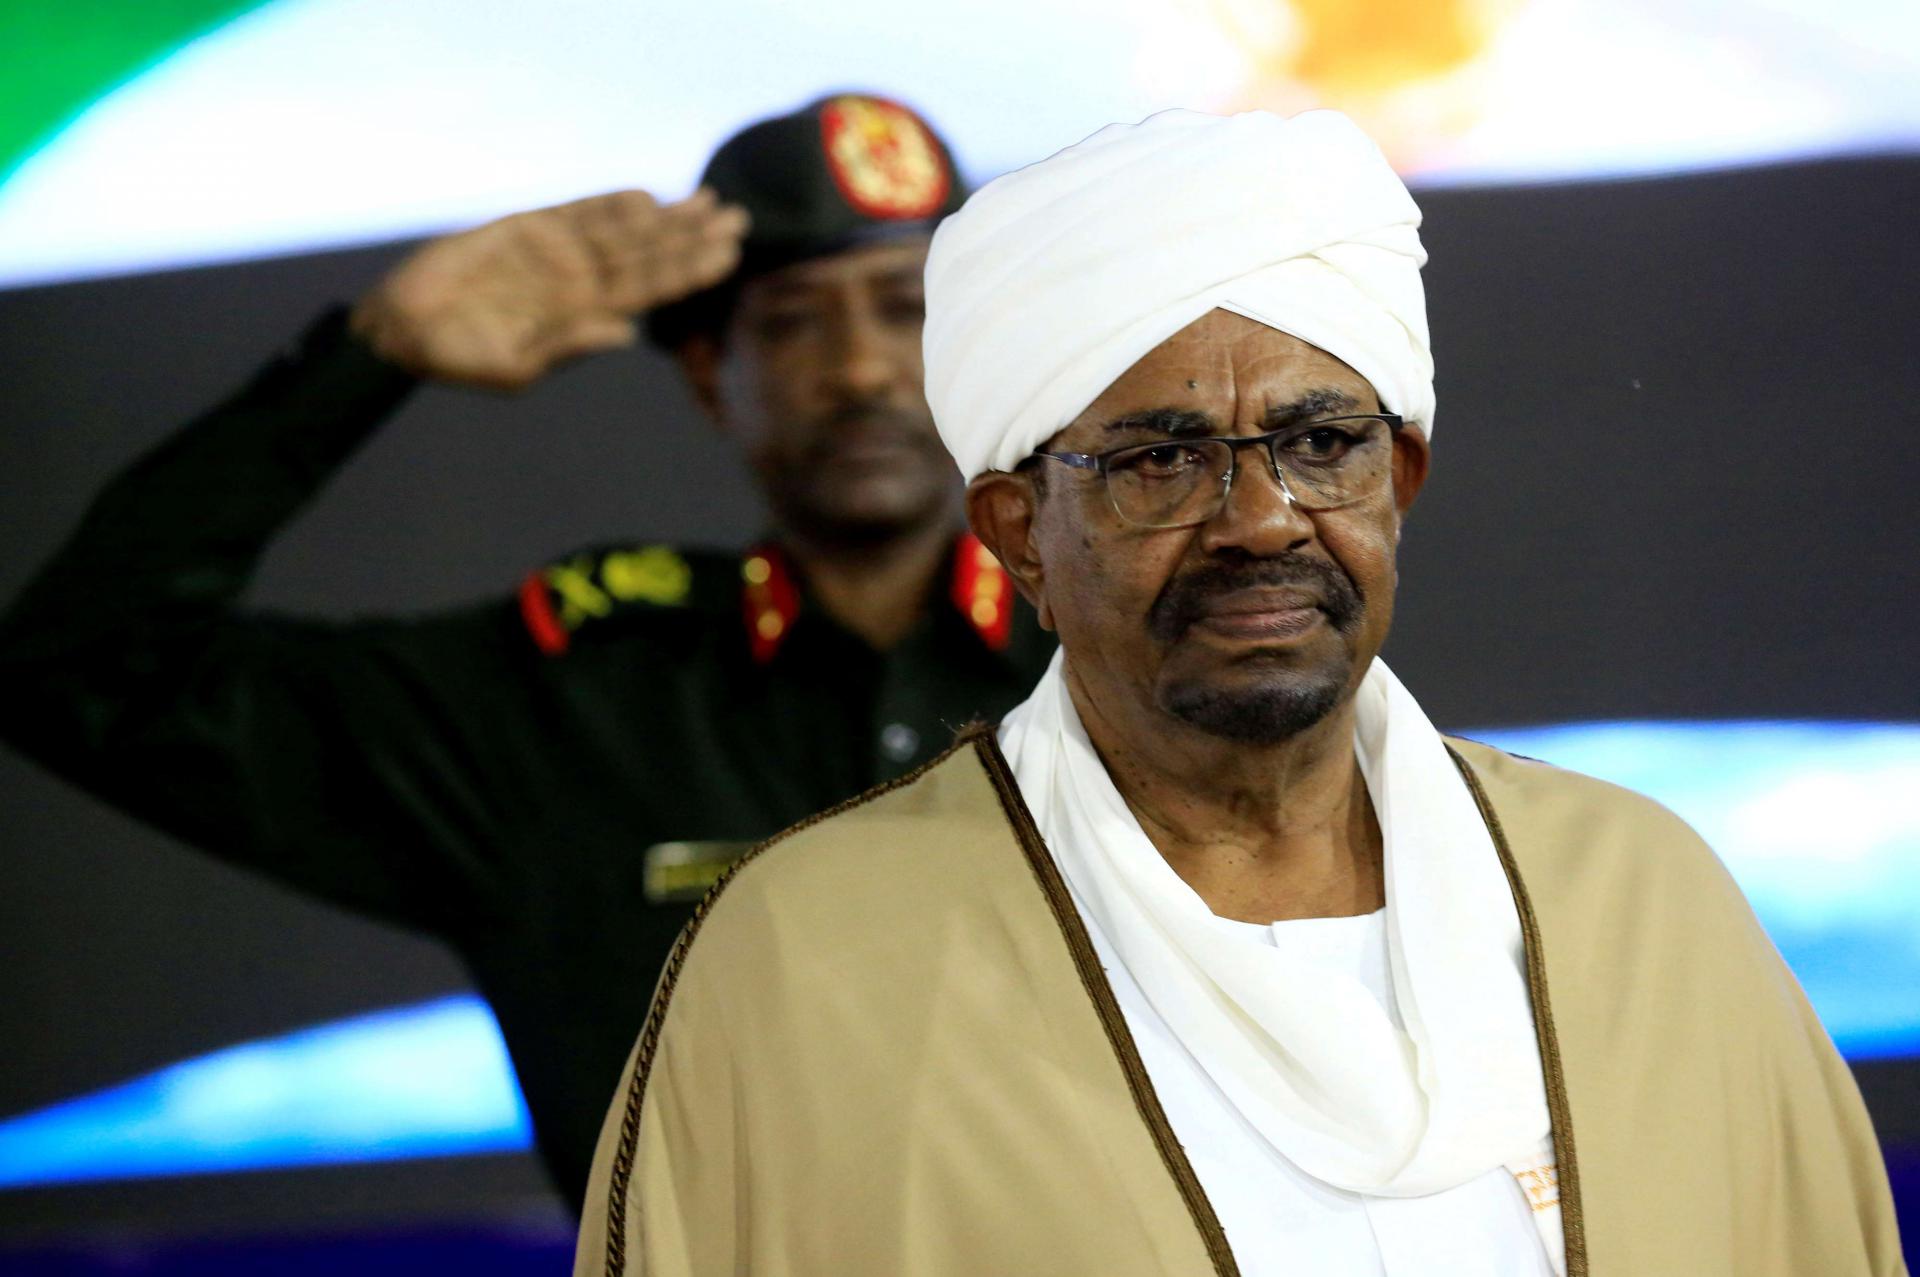  Sudan's army ruler General Abdel Fattah al-Burhan said more than $113 million worth of cash in three currencies had been seized from Bashir's residence